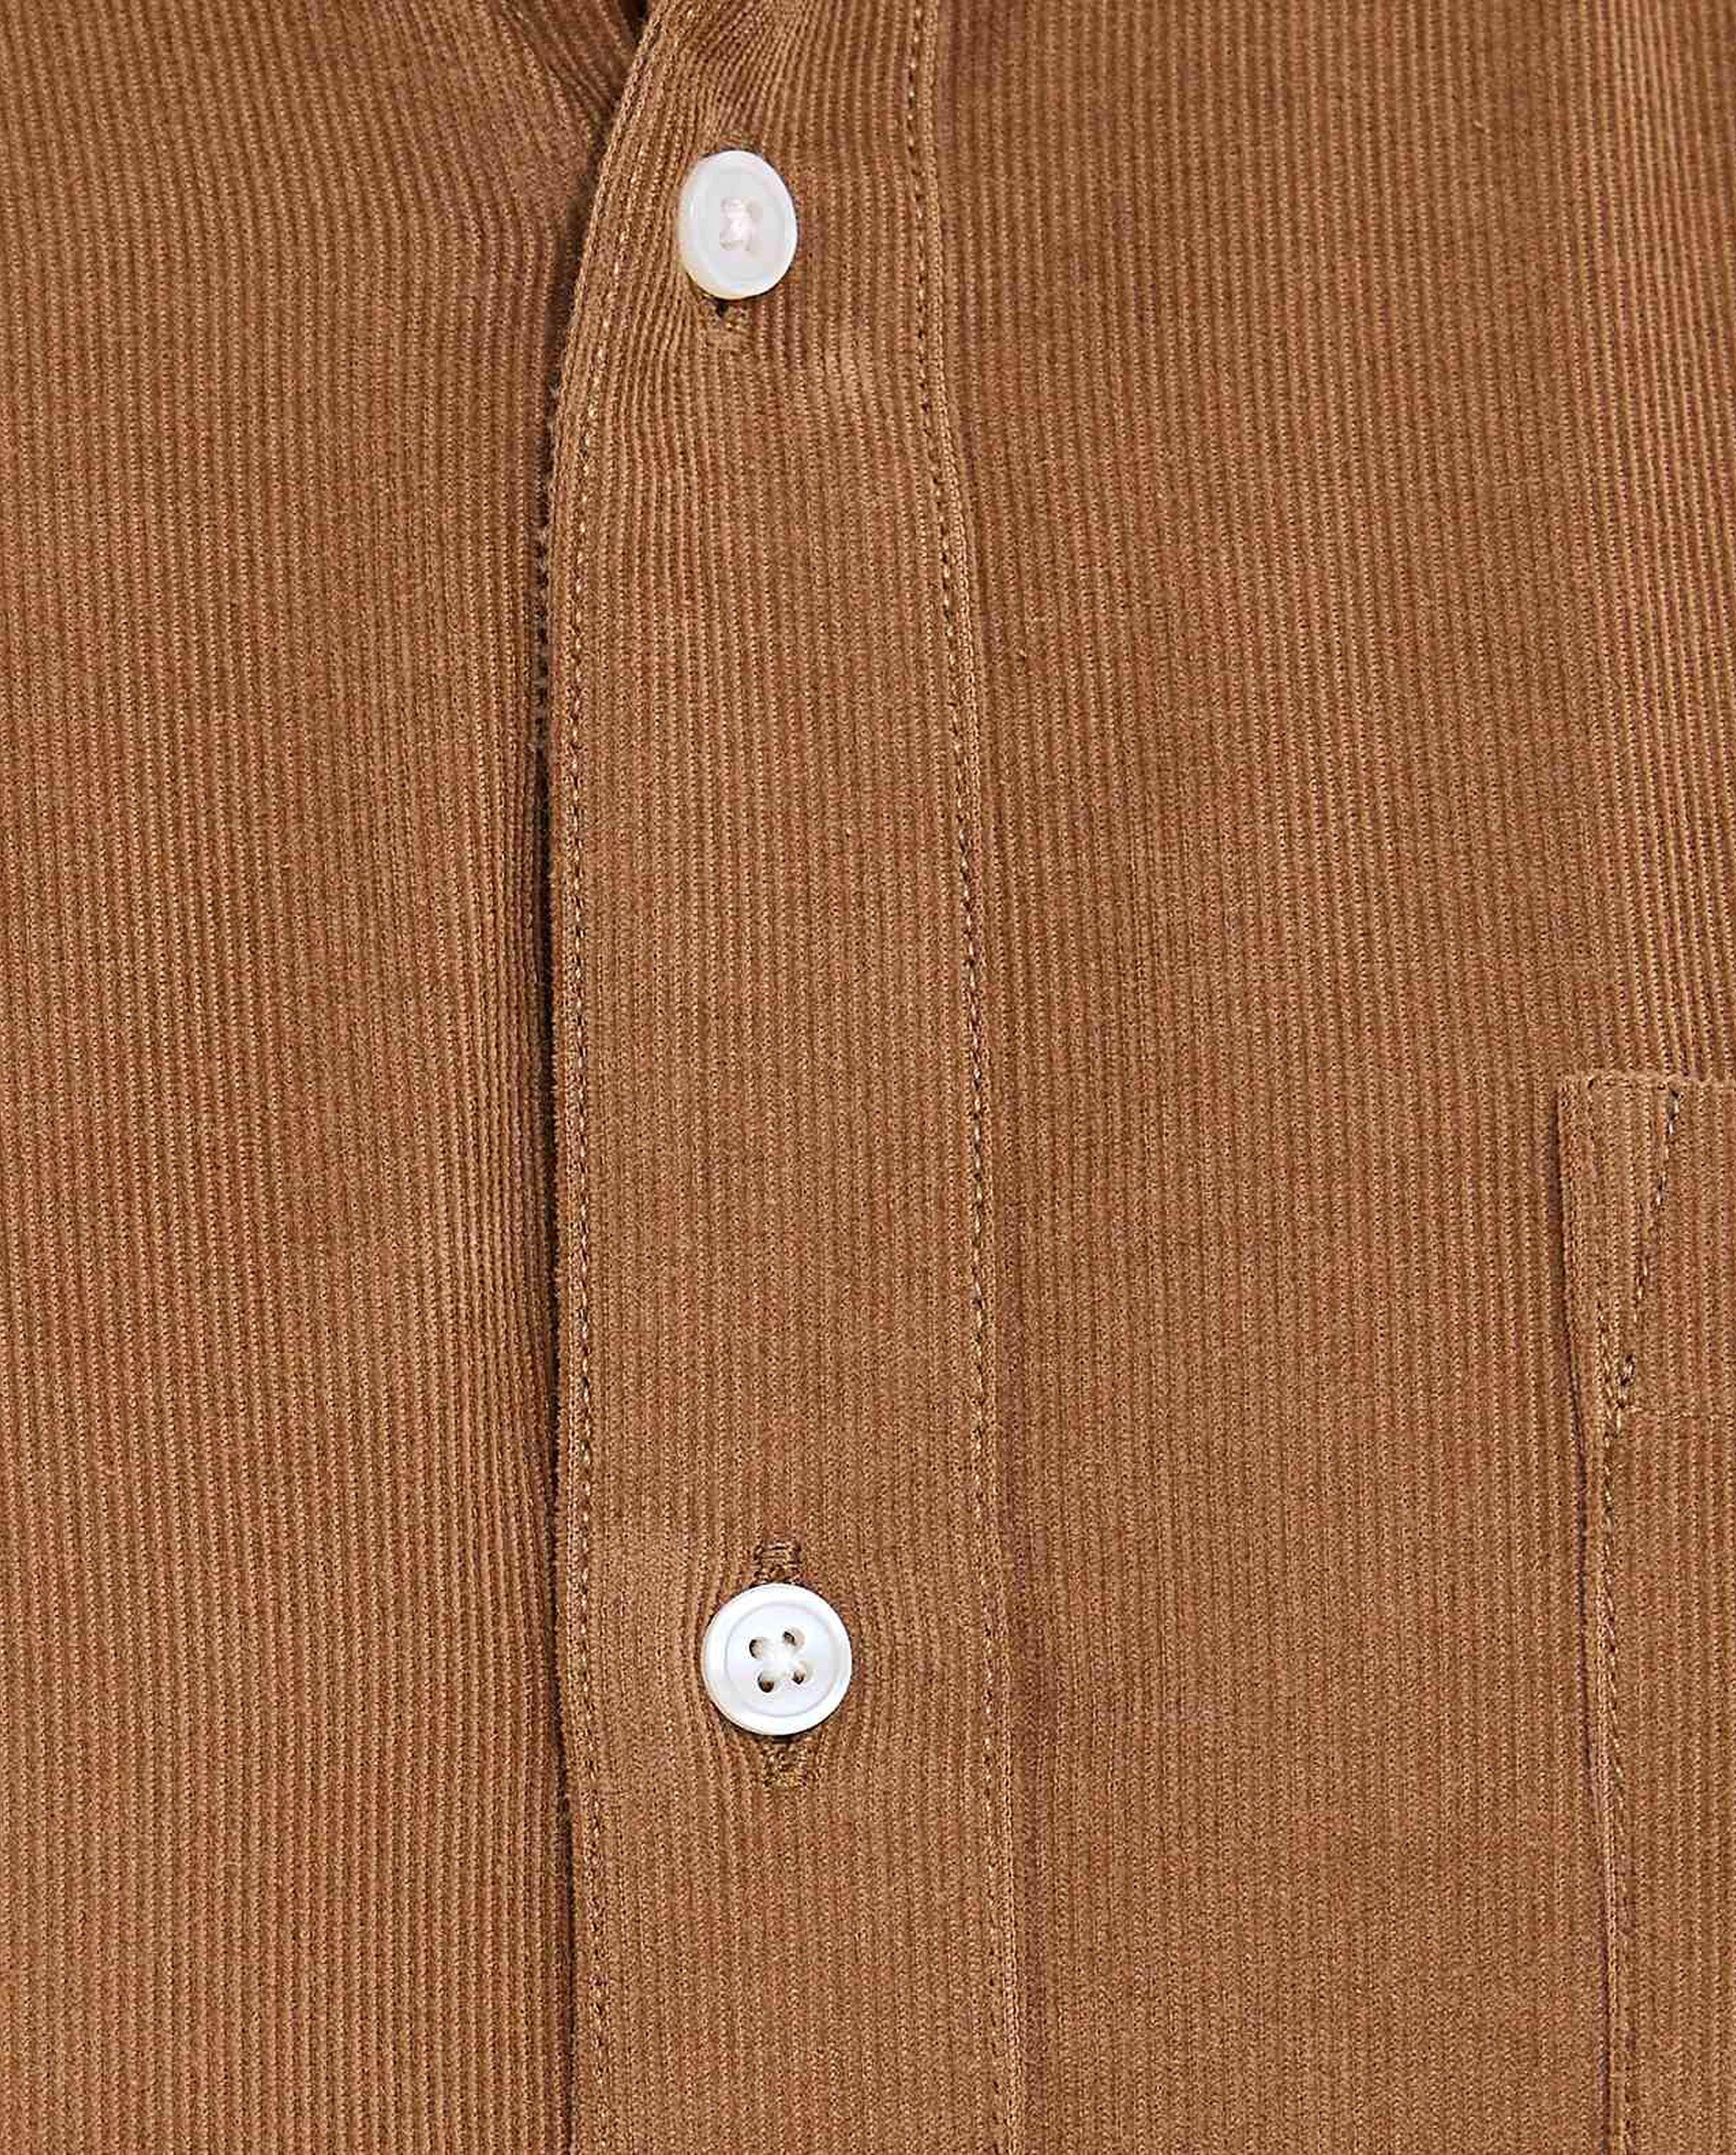 Solid Shirt with Button-Down Collar and Long Sleeves